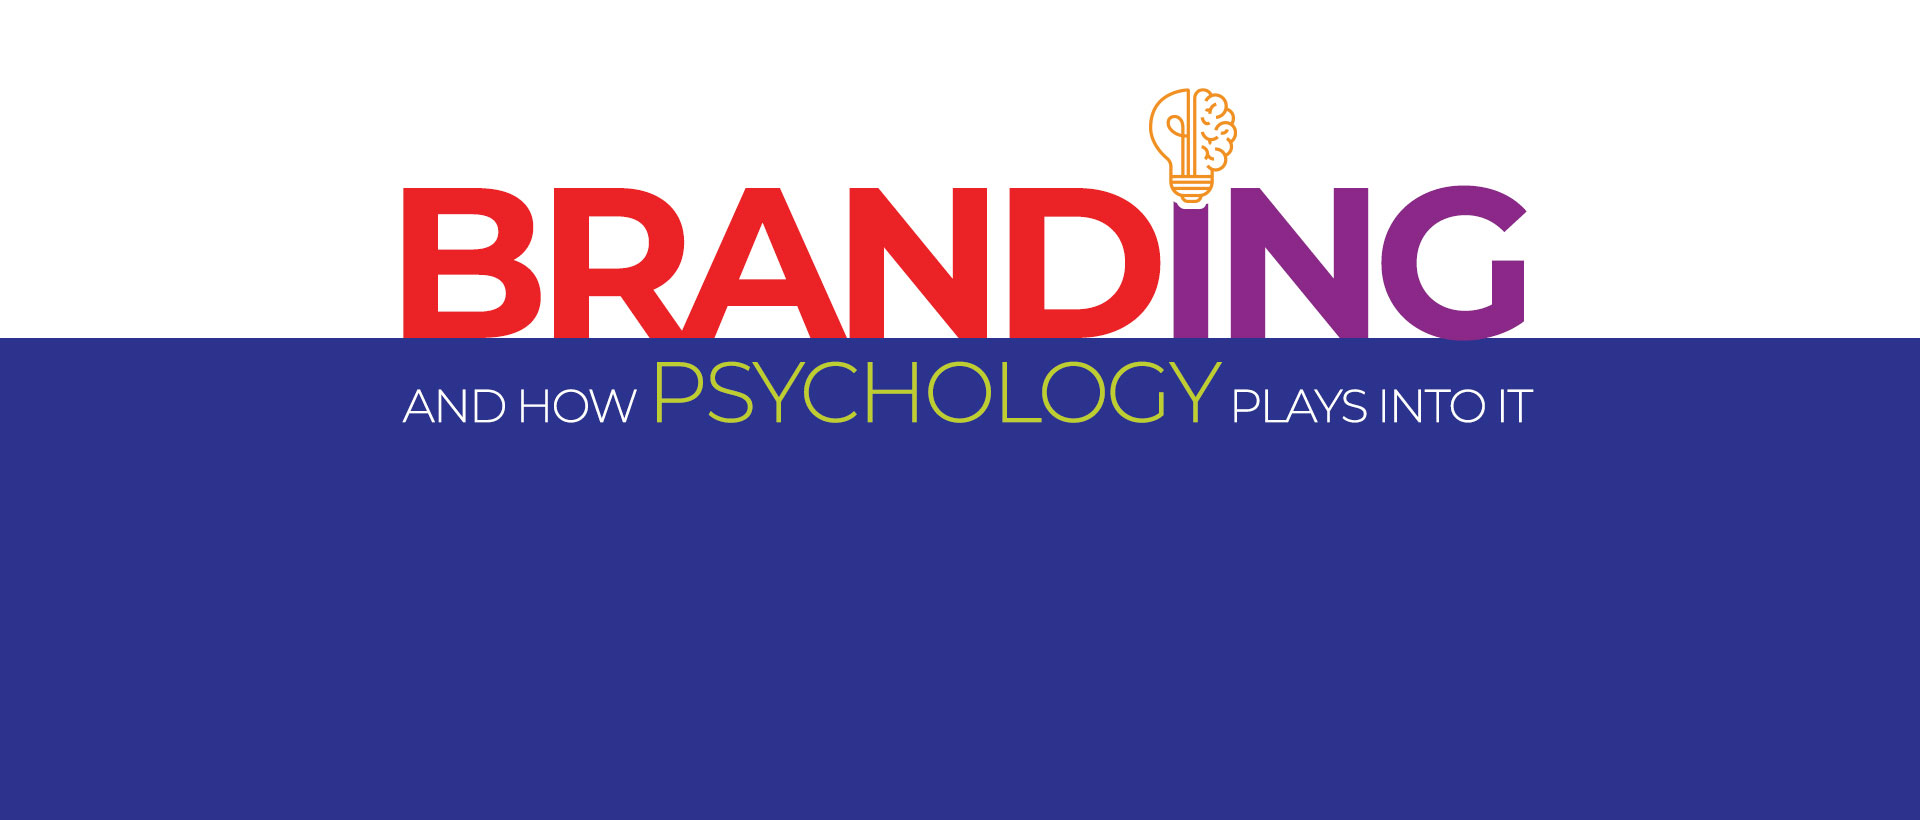 Branding and how Psychology plays into it